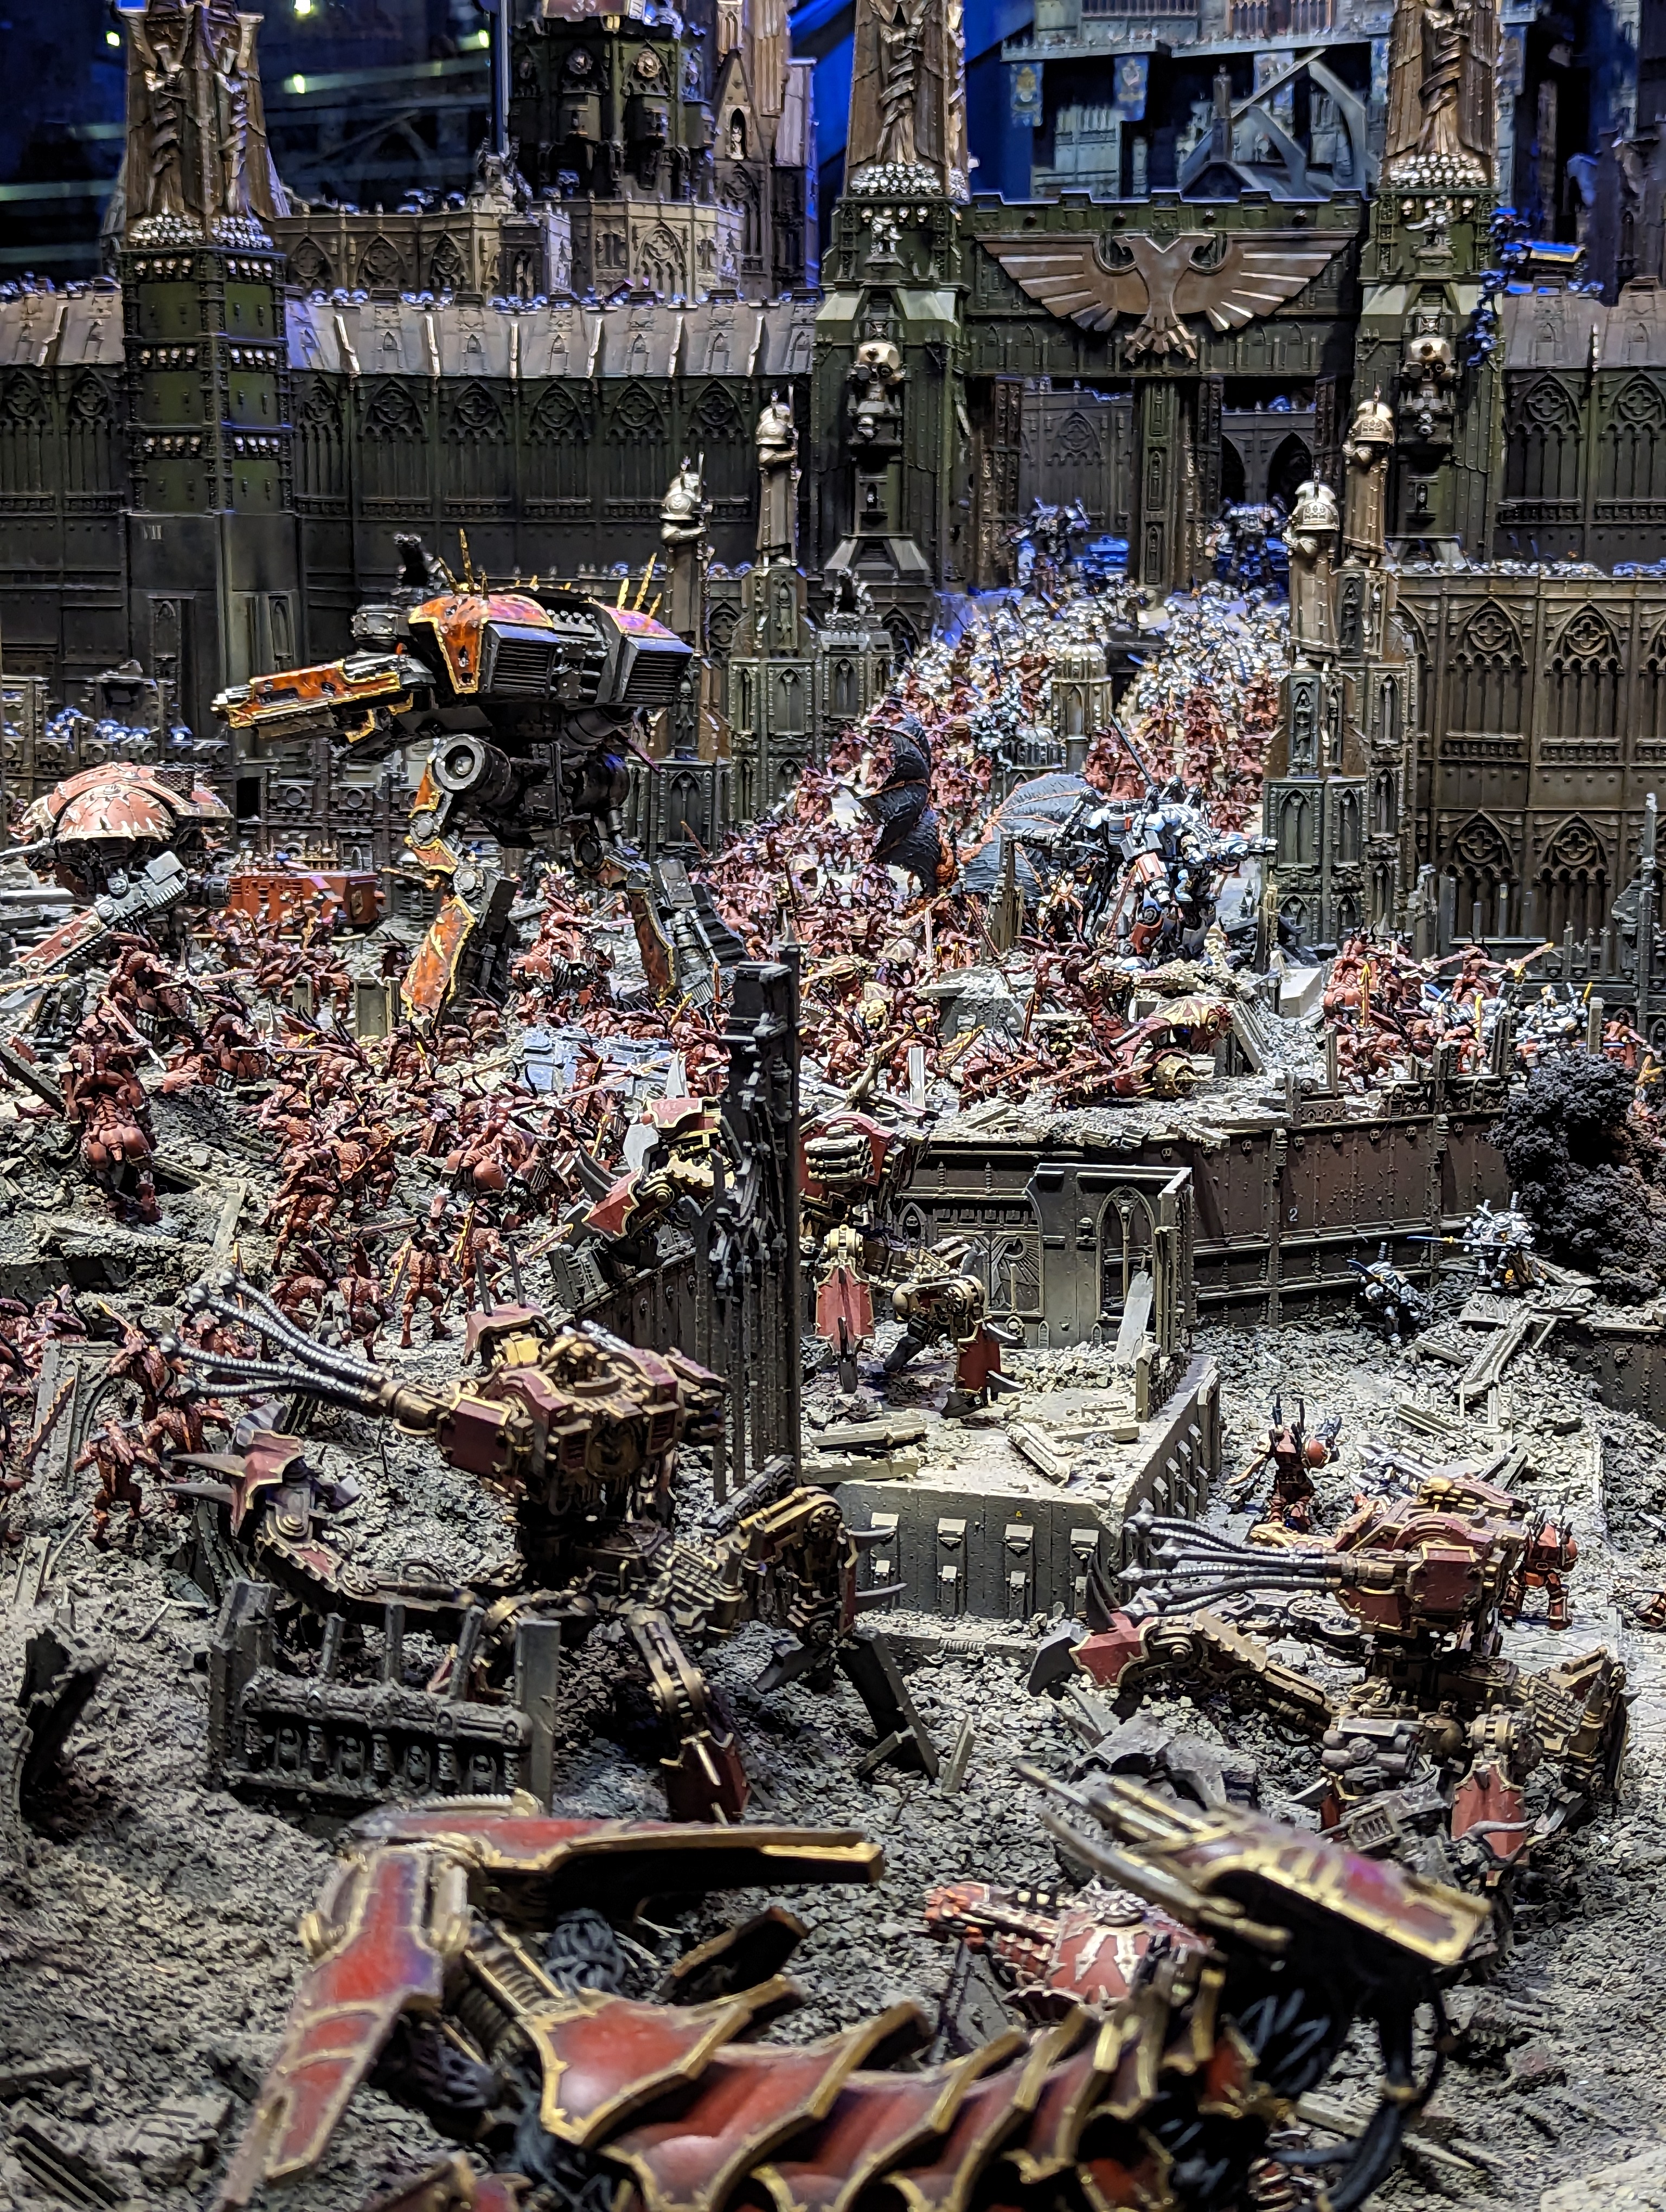 An image of the large centrepiece display at Warhammer World.